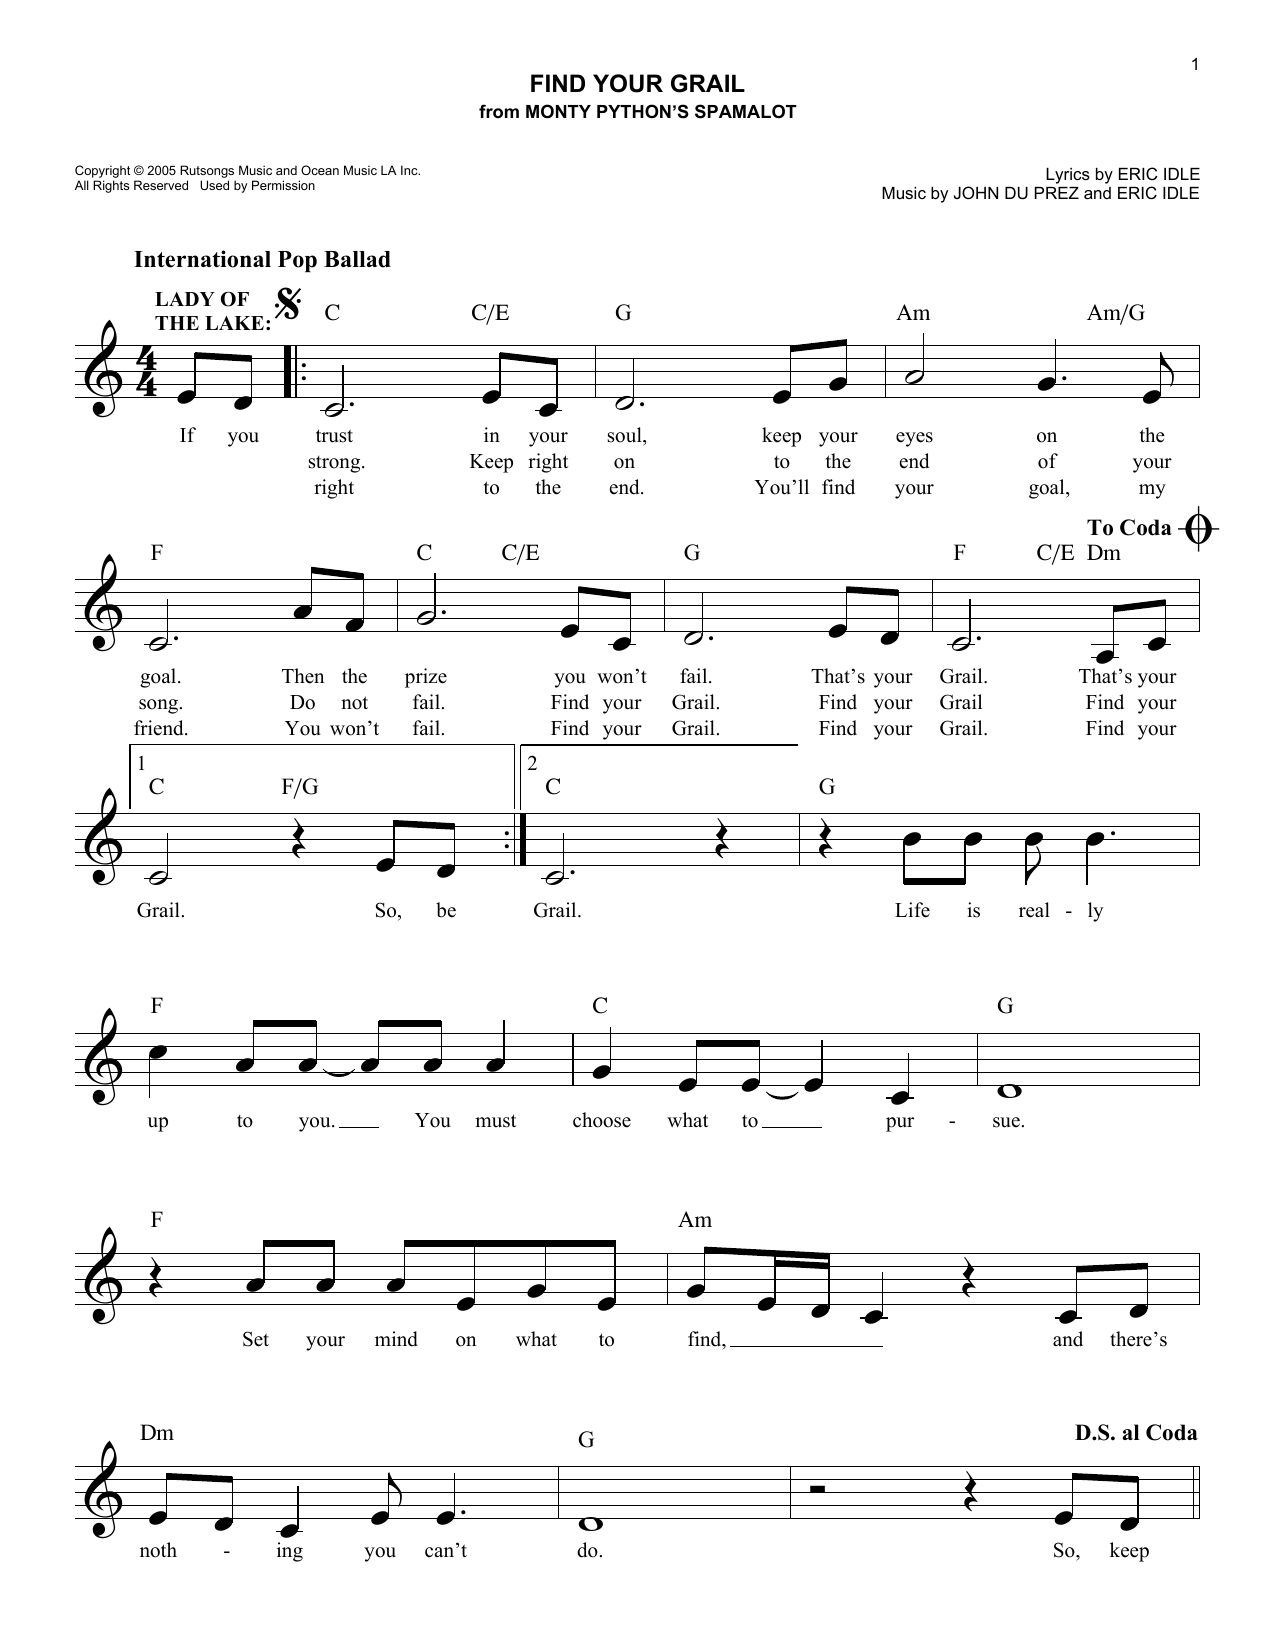 Find Your Grail sheet music